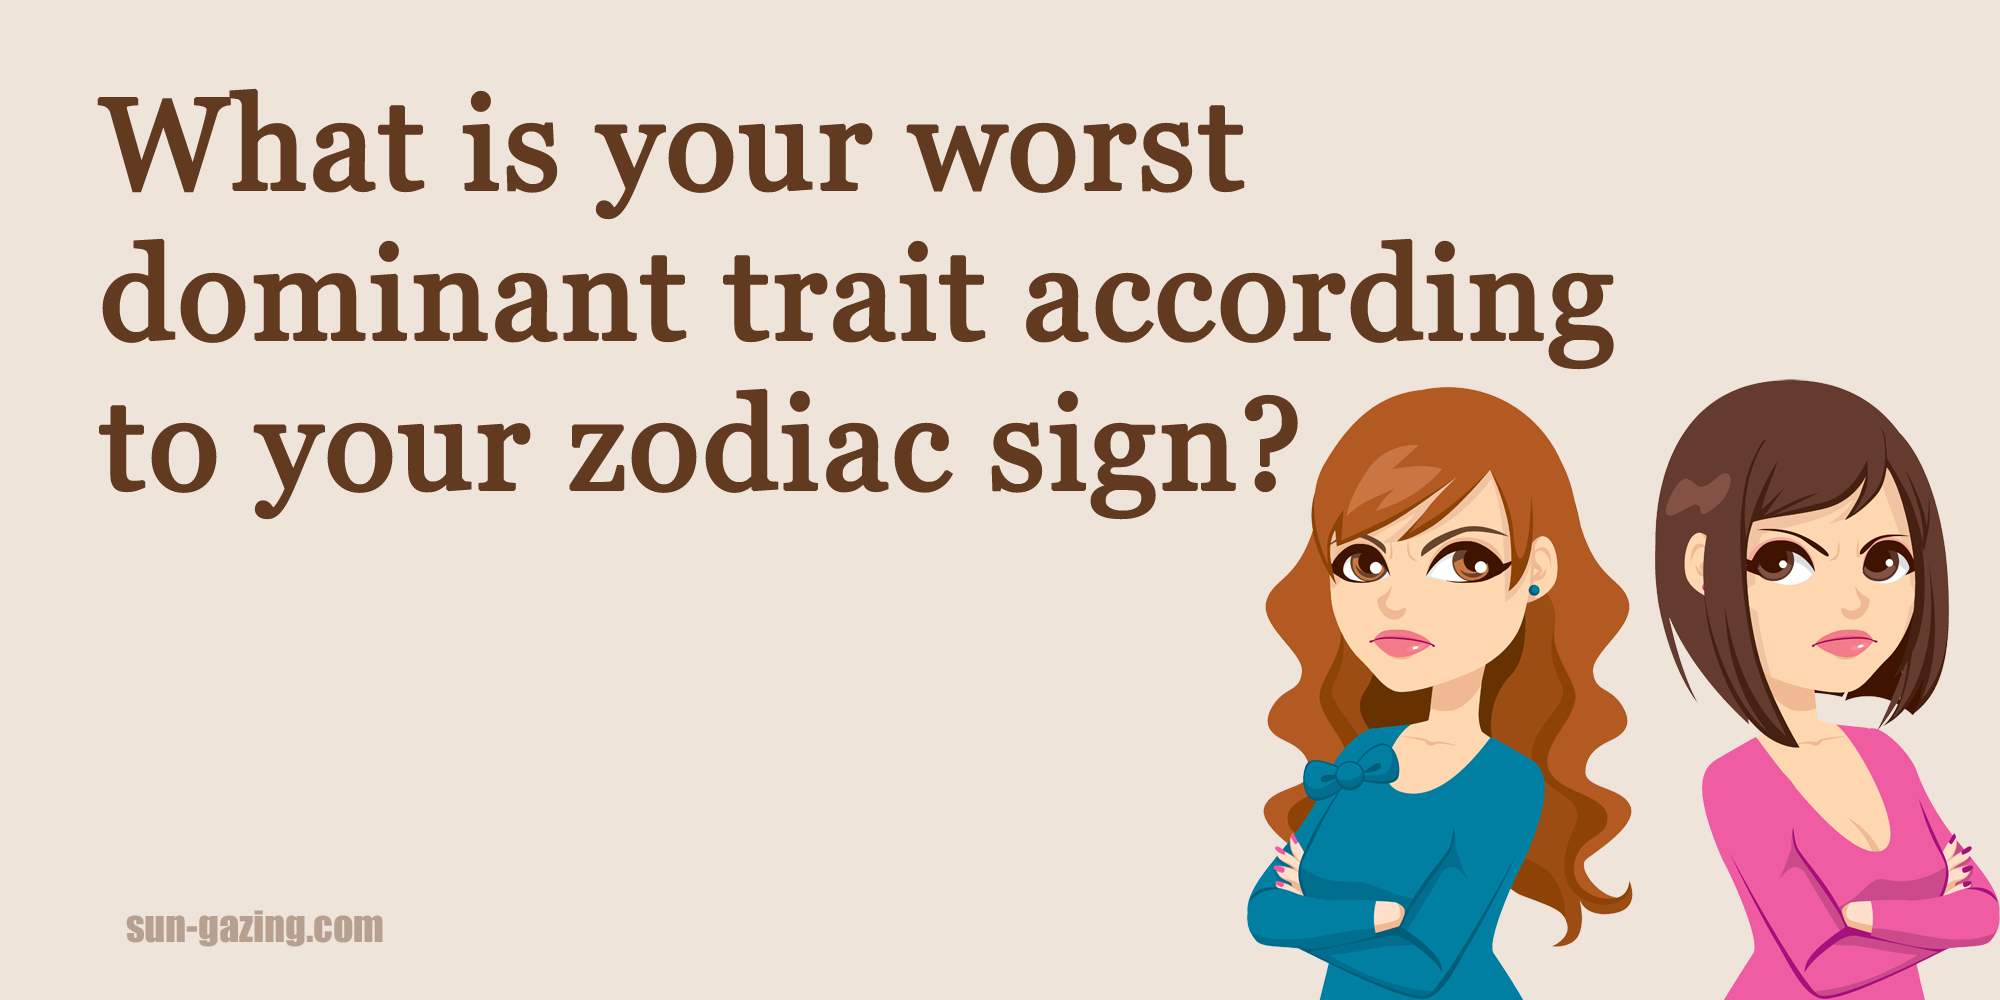 What Is Your Worst Dominant Trait According Your Zodiac Sign?